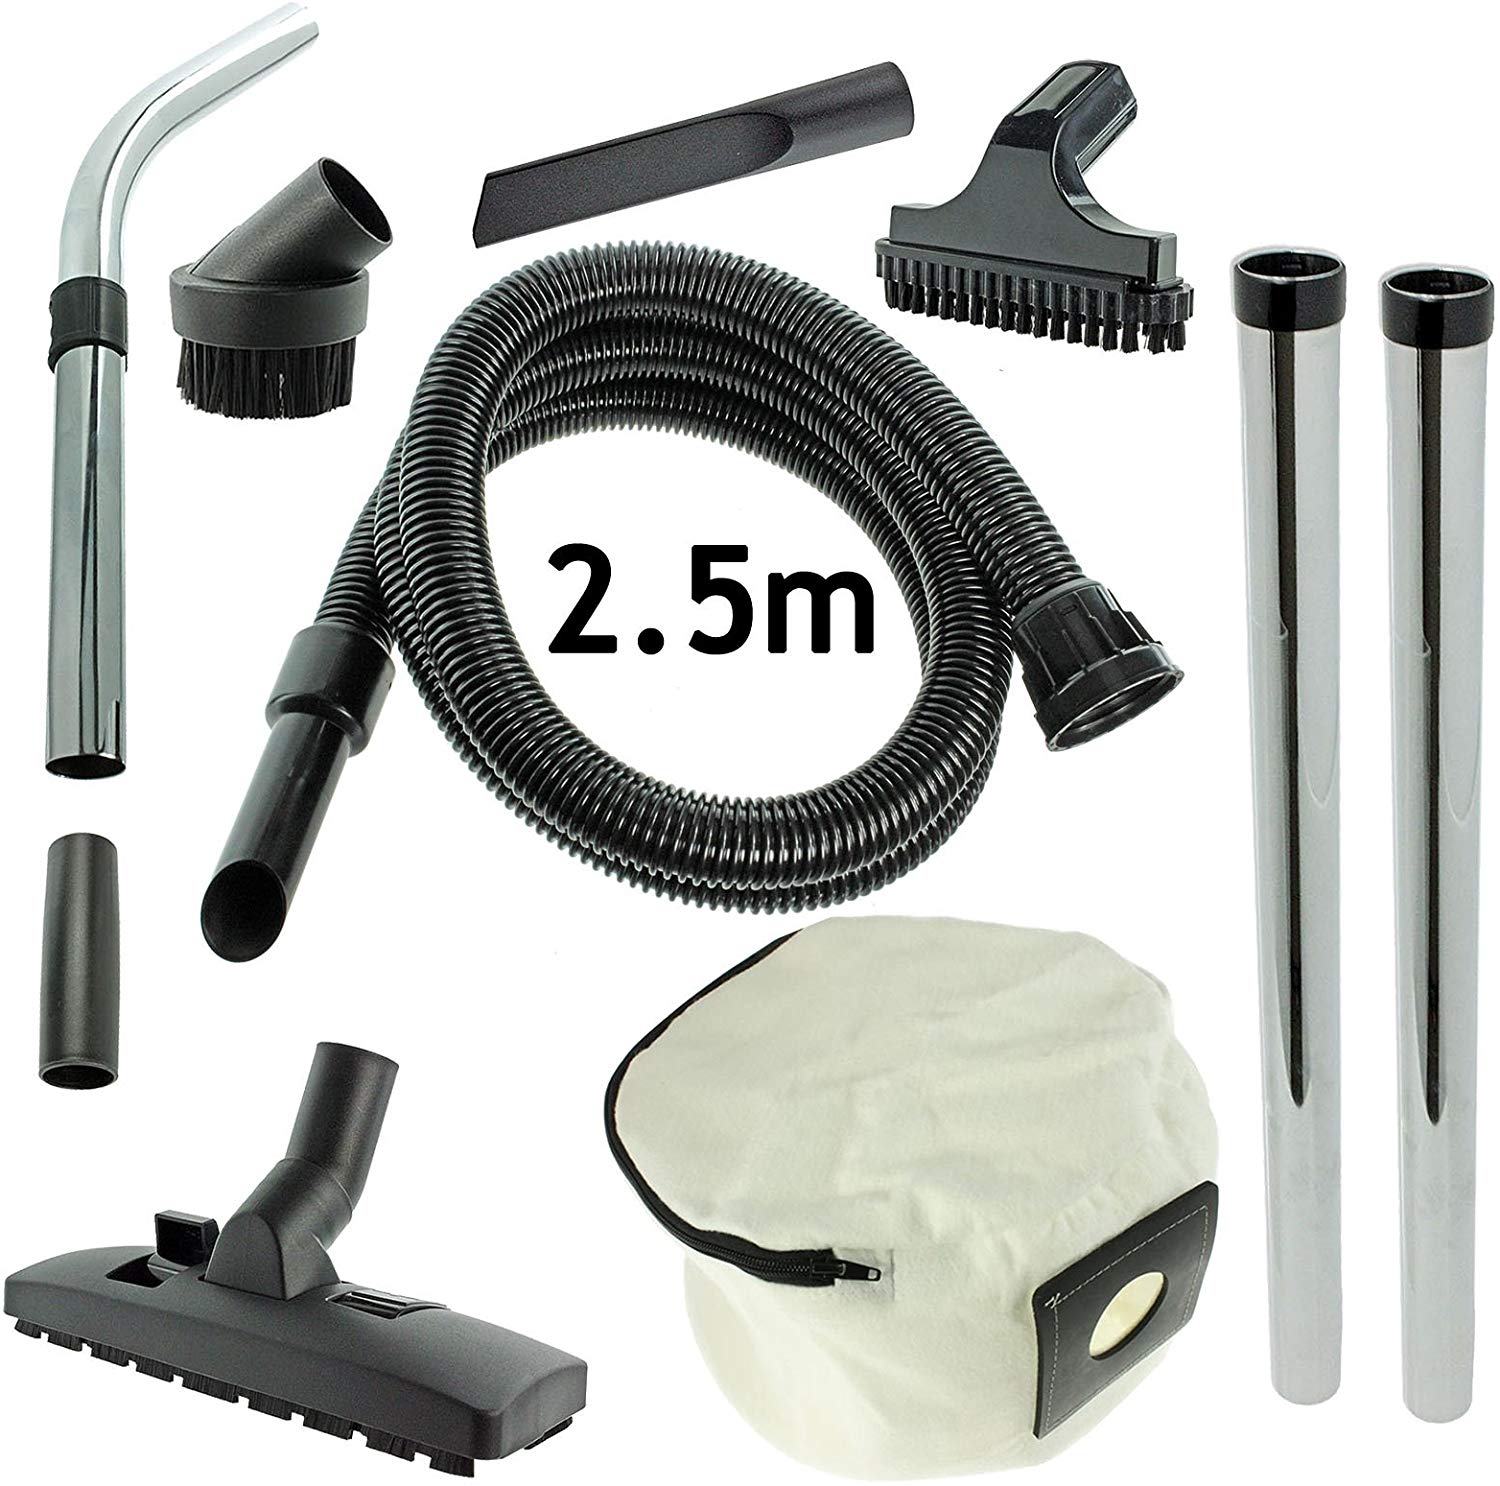 SPARES2GO Hose & Tool Kit Plus Zip Up Bag For Numatic Henry Hetty James Vacuum Cleaner (2.5m)